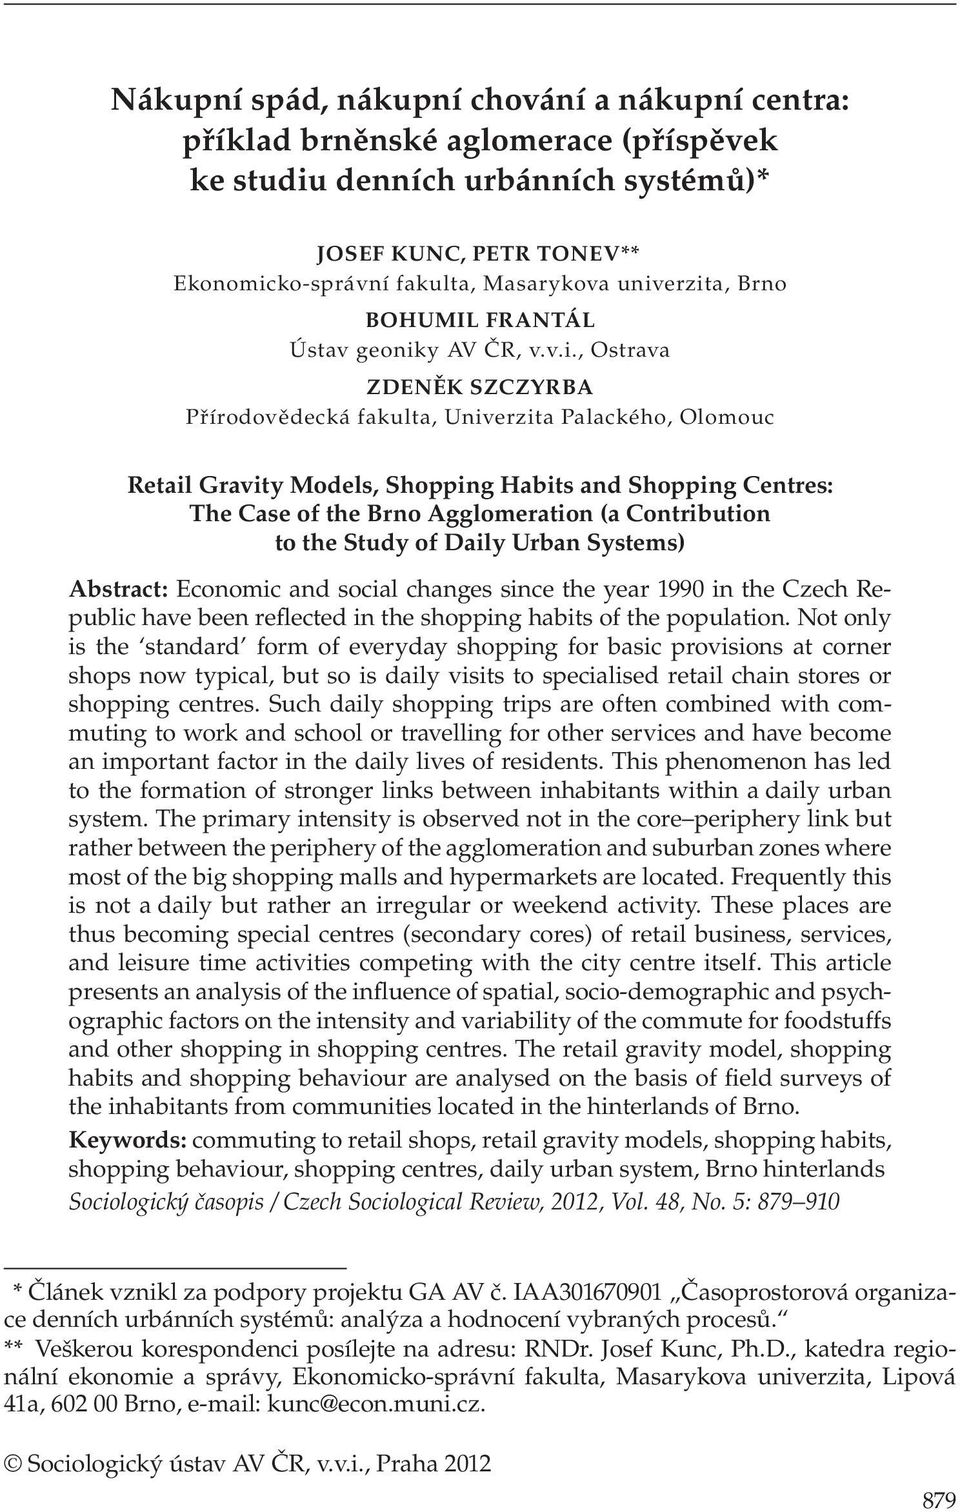 Centres: The Case of the Brno Agglomeration (a Contribution to the Study of Daily Urban Systems) Abstract: Economic and social changes since the year 1990 in the Czech Republic have been reflected in